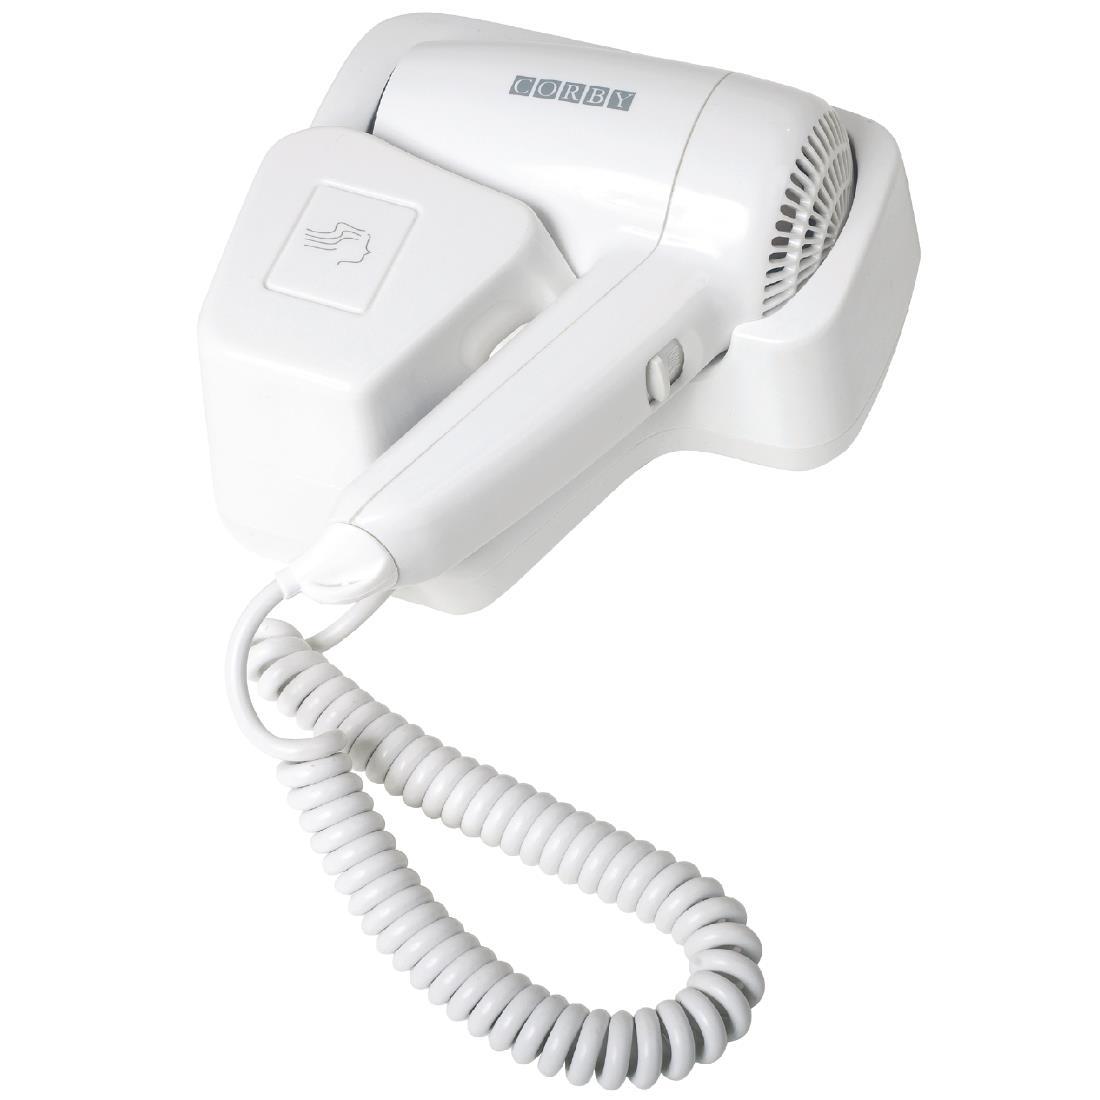 Corby Wall Hair Dryer - DP916  - 1